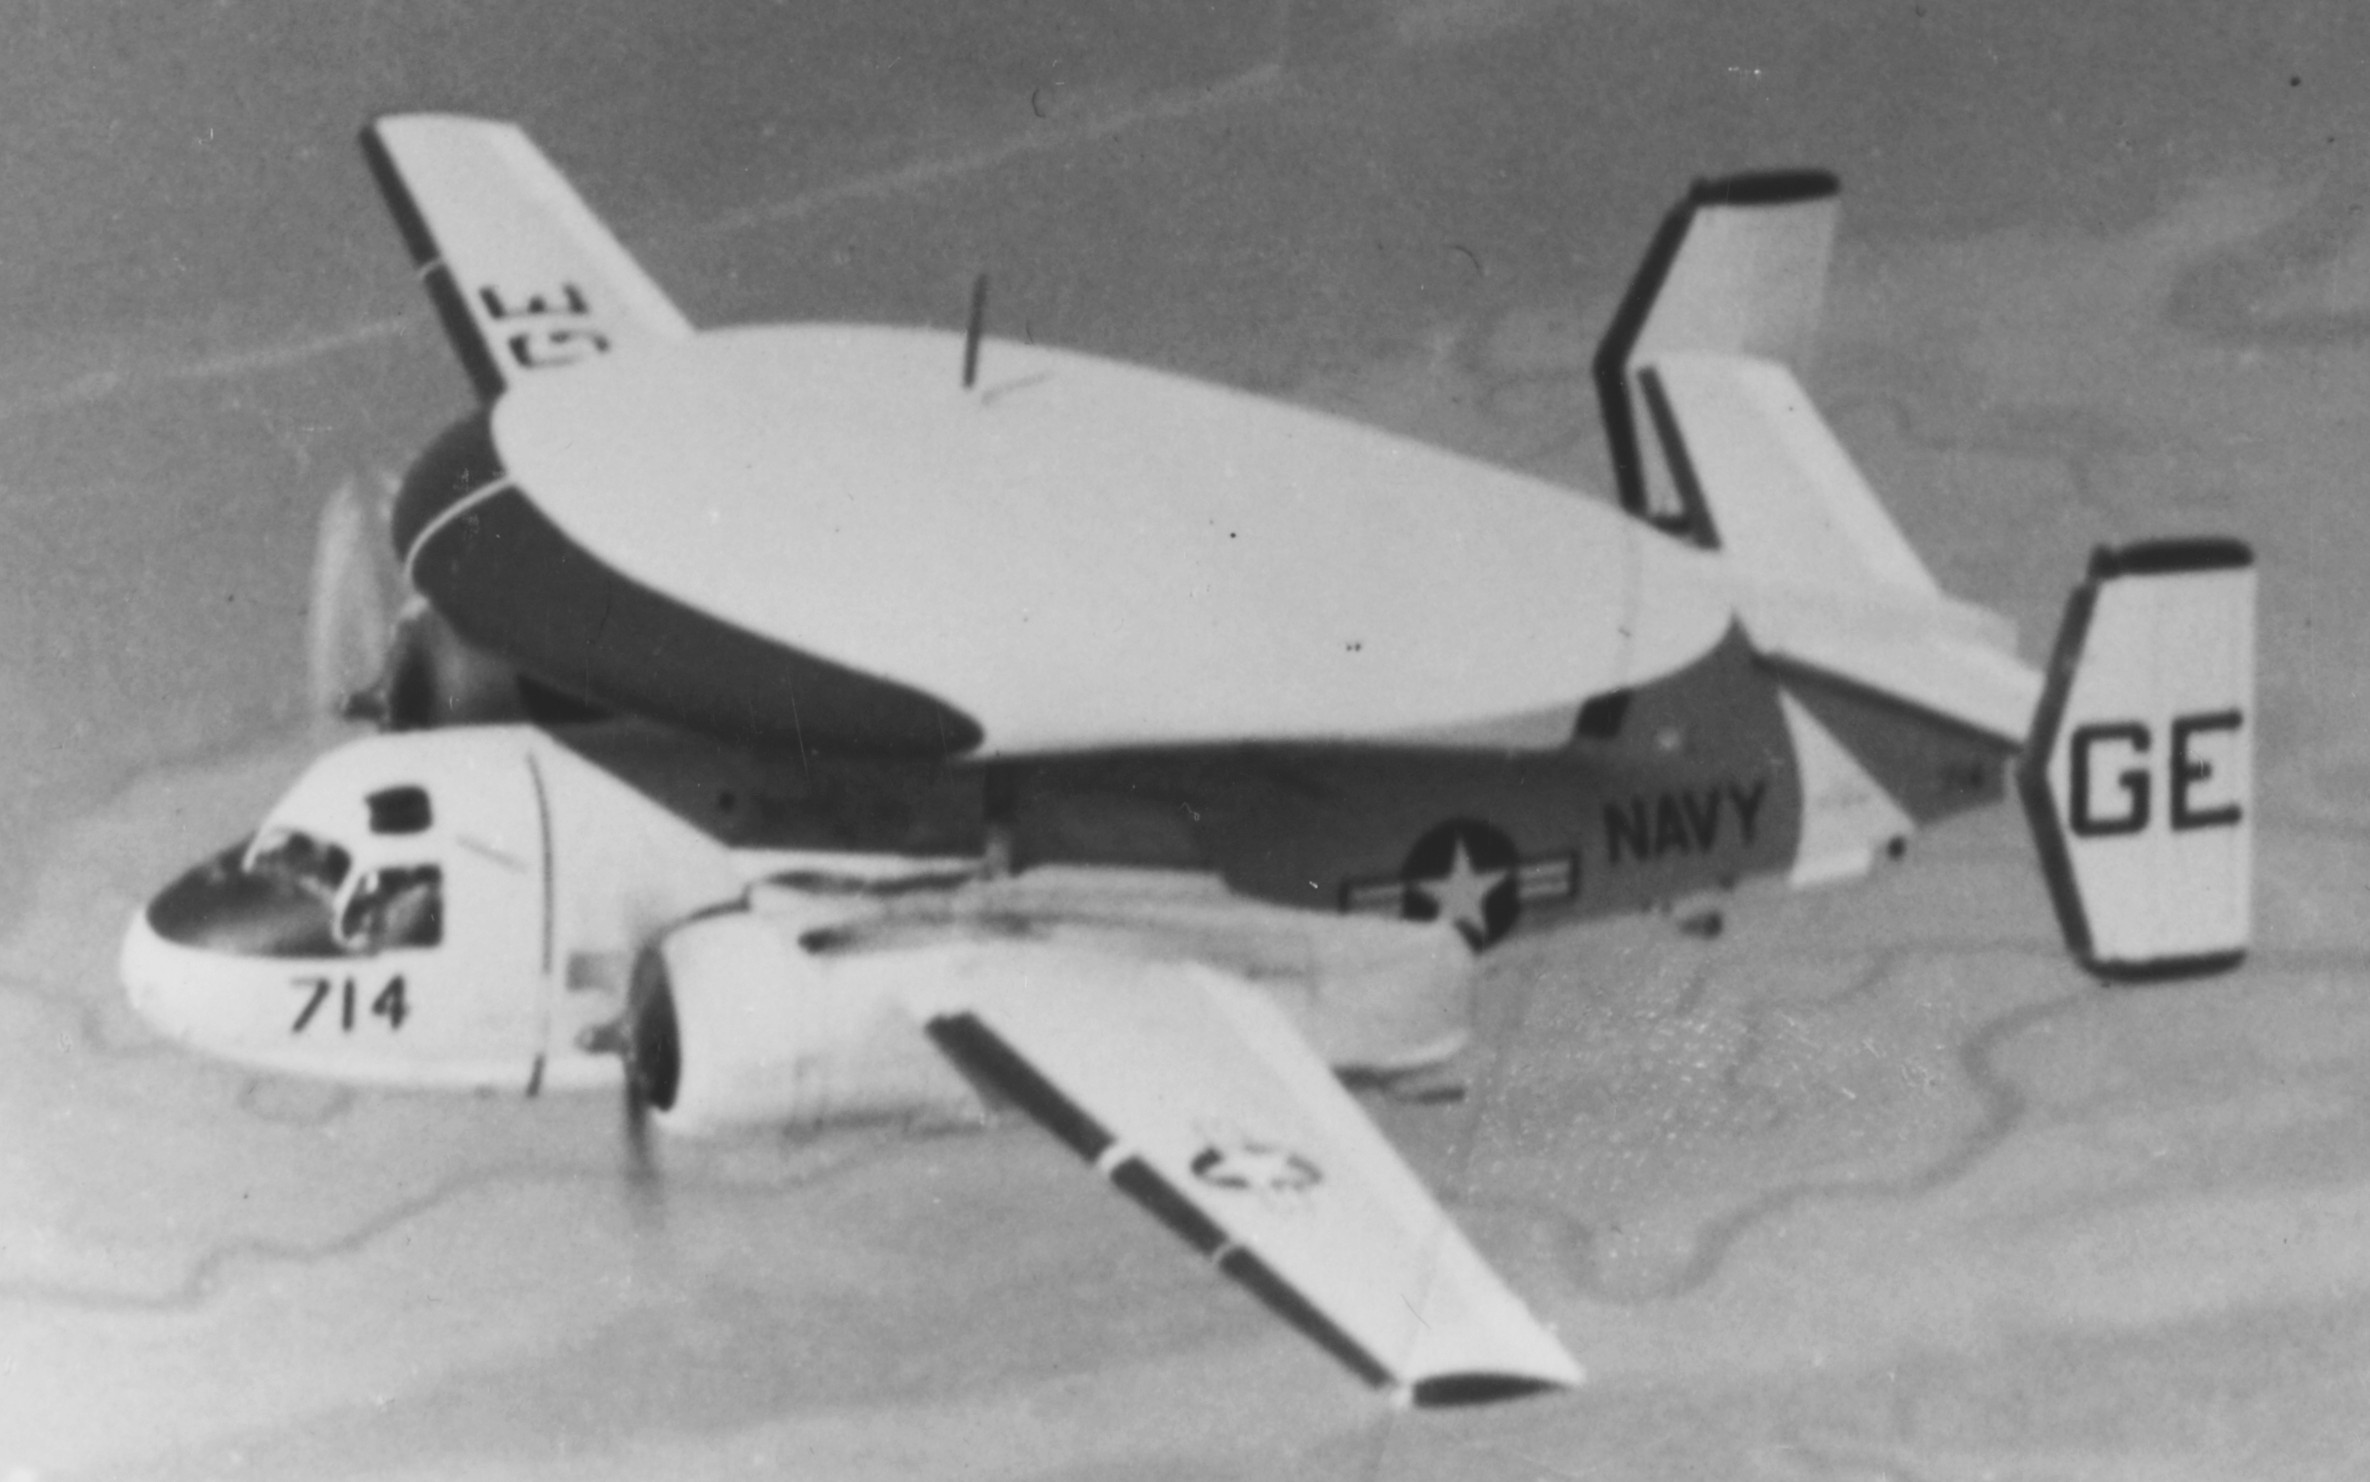 vaw-12 bats carrier airborne early warning squadron caraewron us navy grumman e-1b tracer 17a